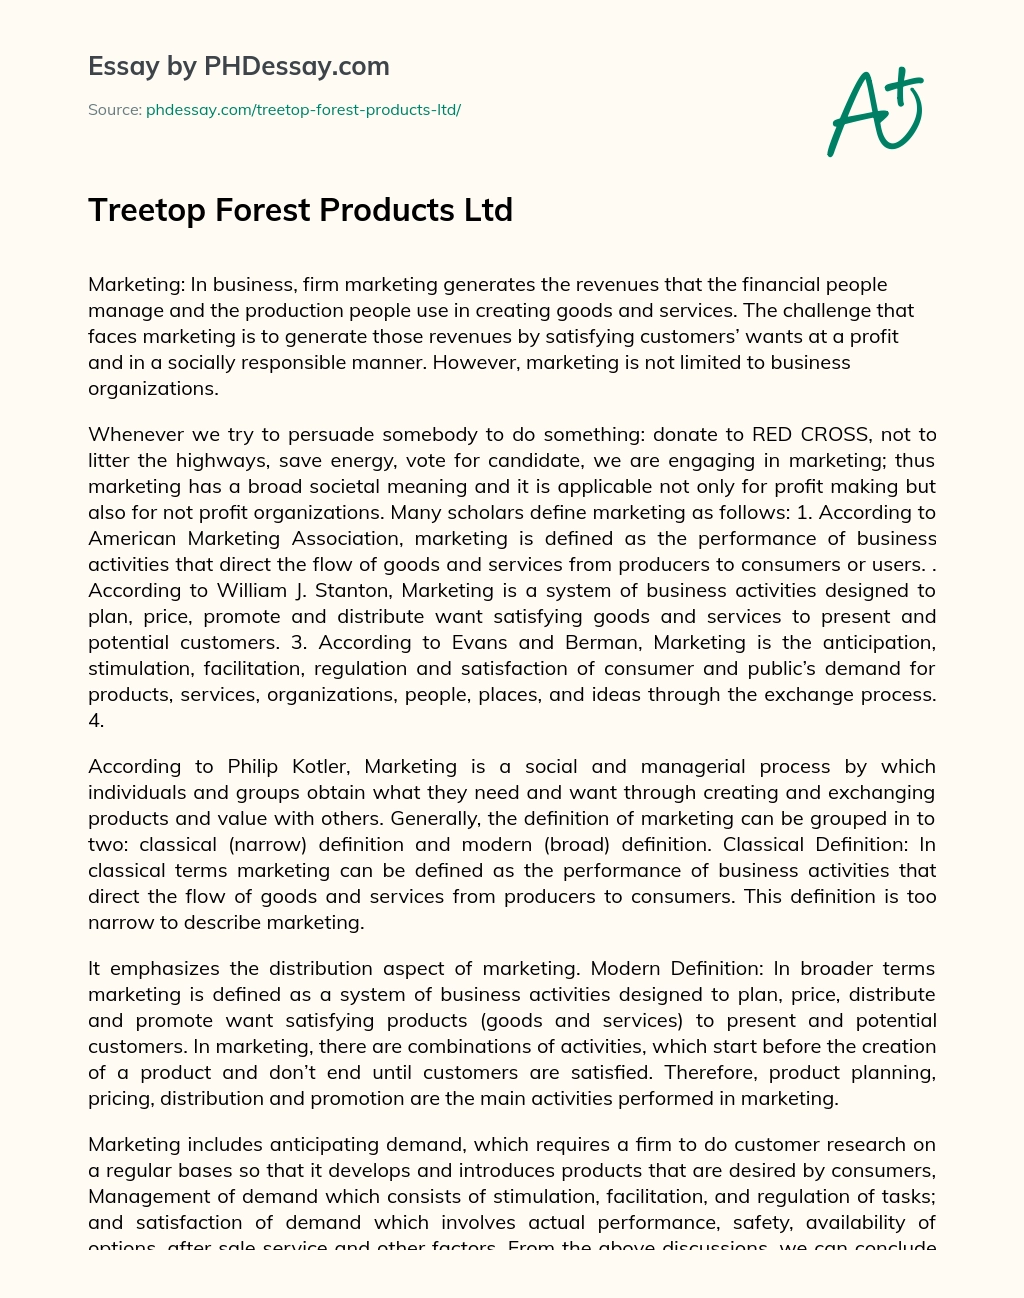 Treetop Forest Products Ltd essay